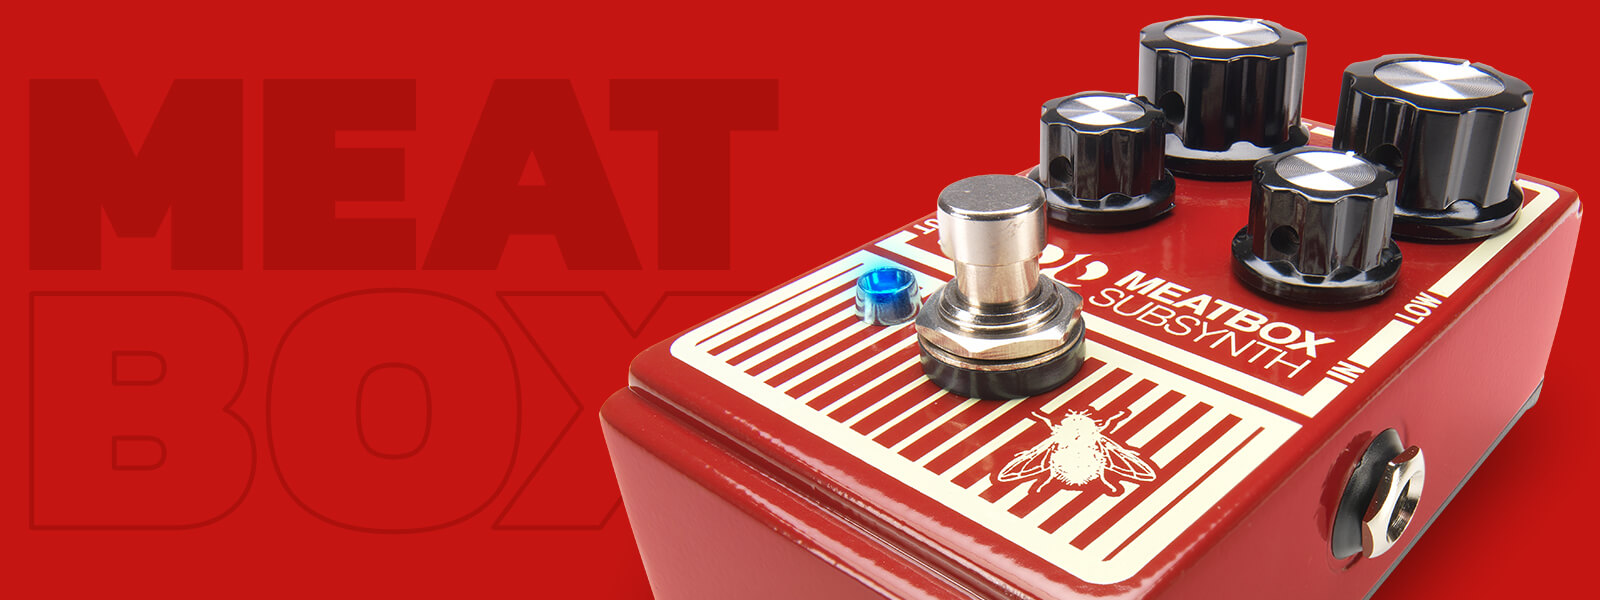 DOD Meatbox distortion guitar pedal on matching red background